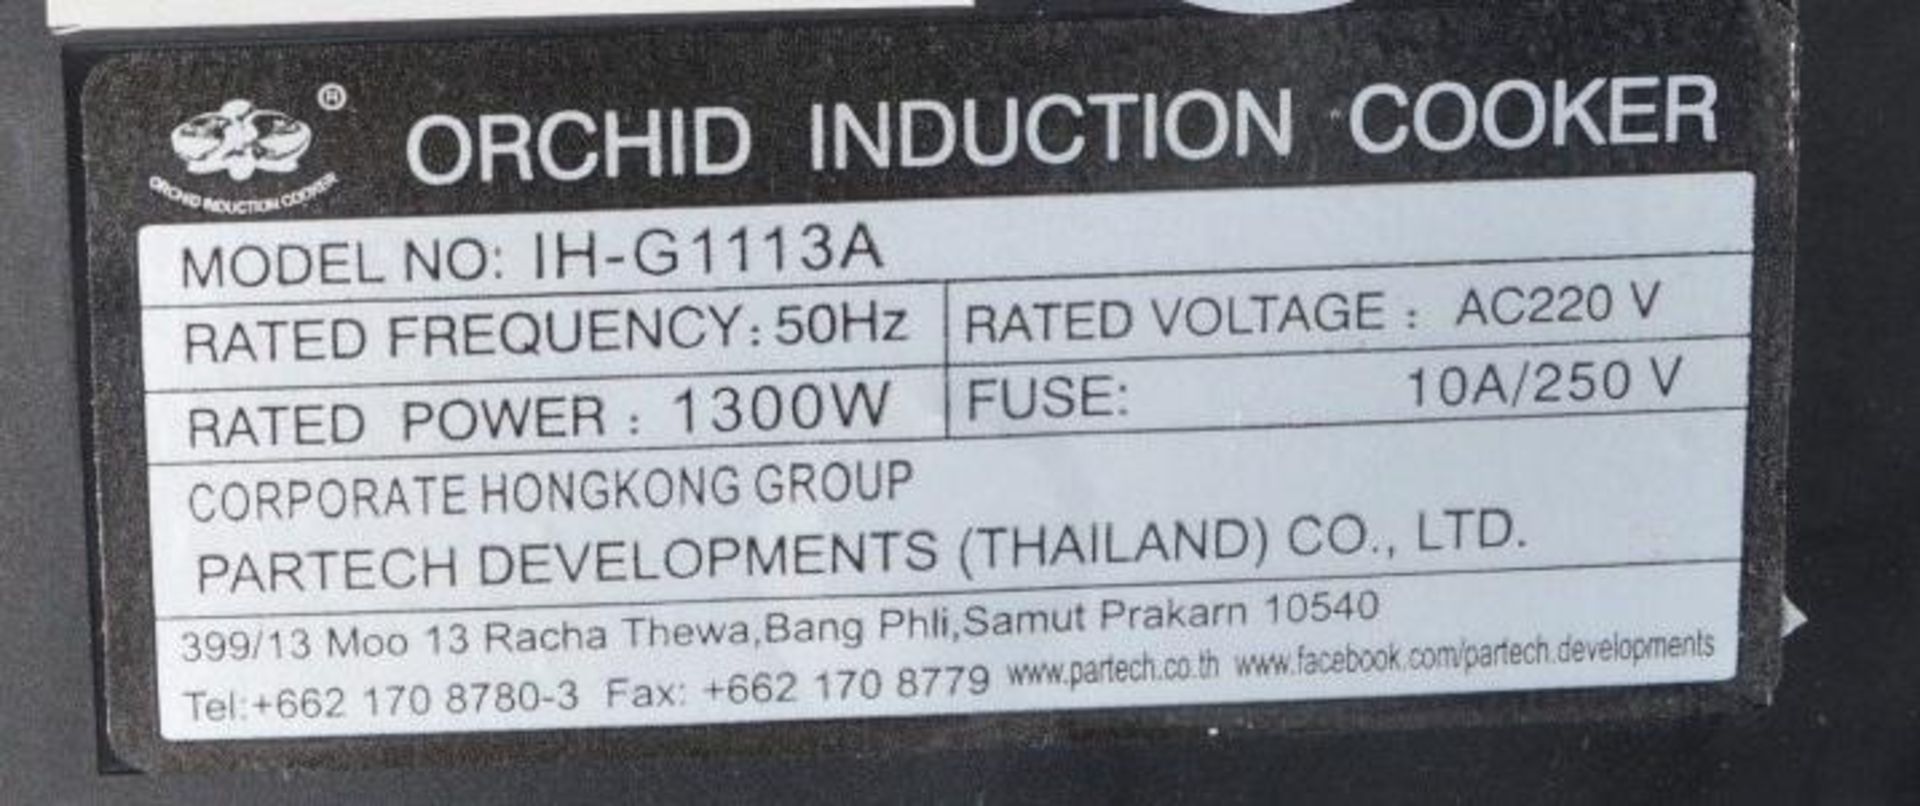 1 x Orchid IH-G1113A Induction Cooker - Pre-owned, Taken From An Asian Fusion Restaurant - Ref: MC79 - Image 2 of 5